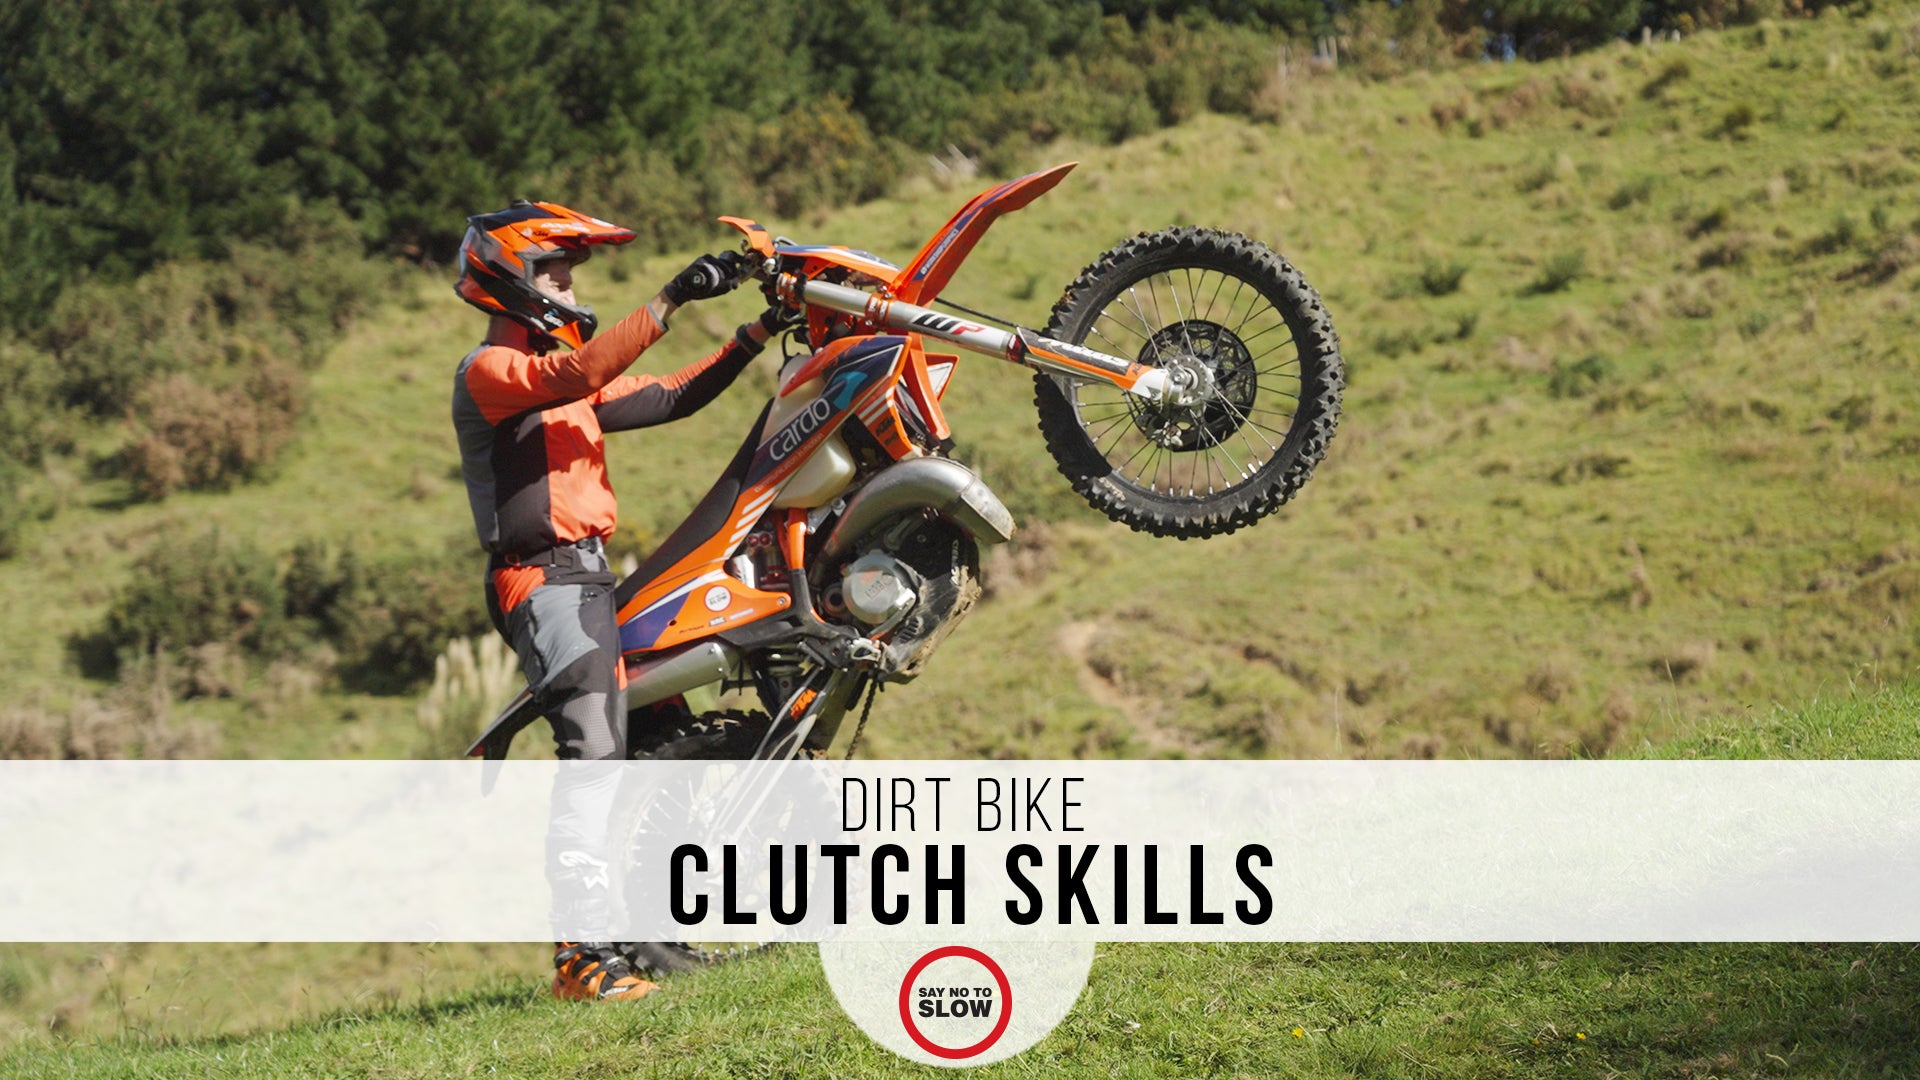 Clutch Control Exercises for Dirt Bikes